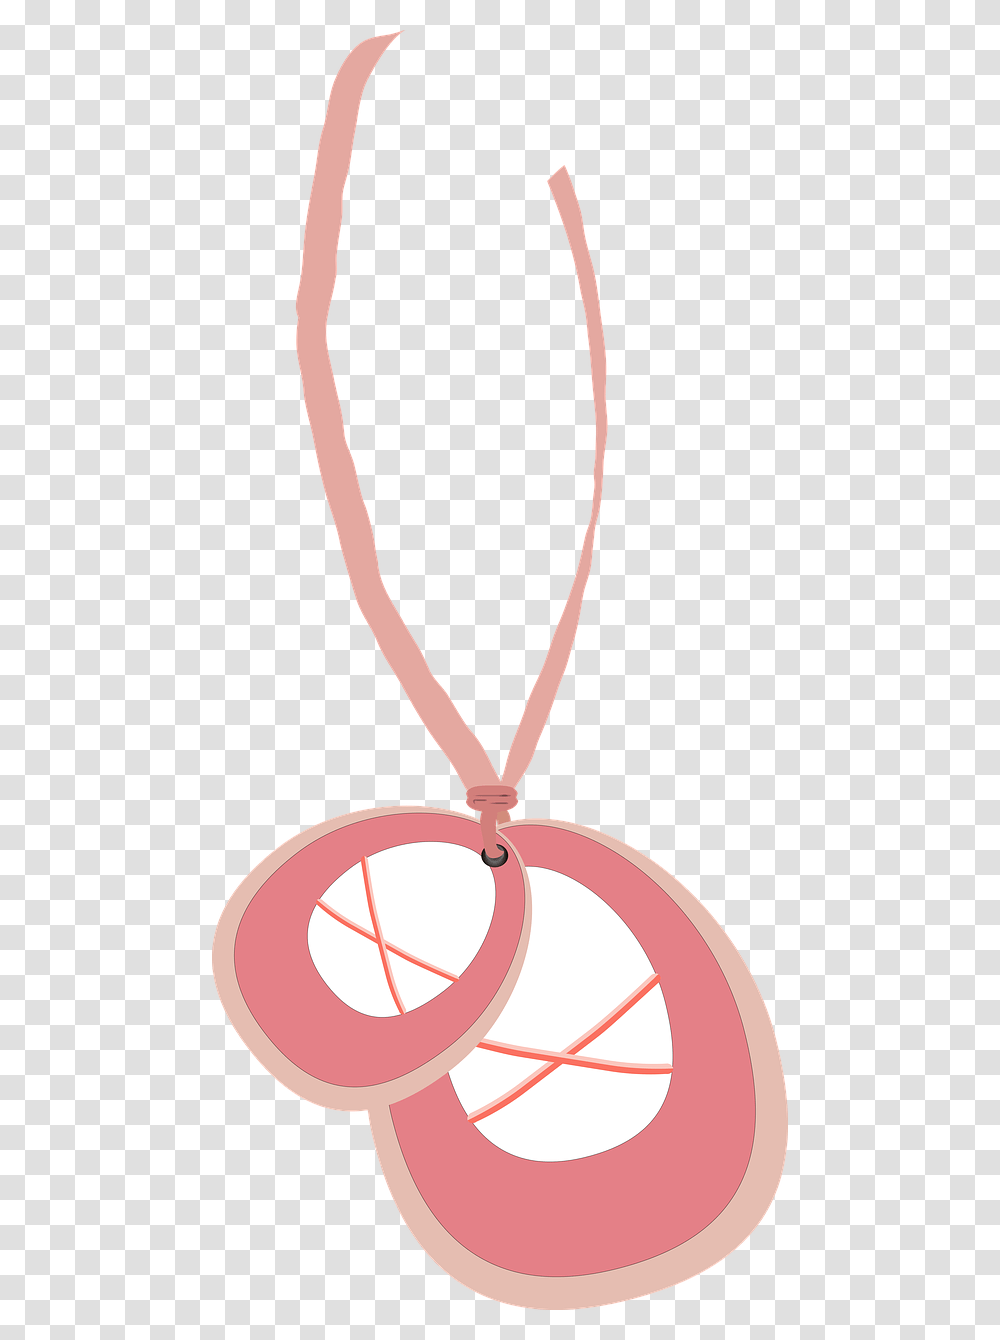 Ballet Shoes Dance Free Photo Pendant, Locket, Jewelry, Accessories, Accessory Transparent Png